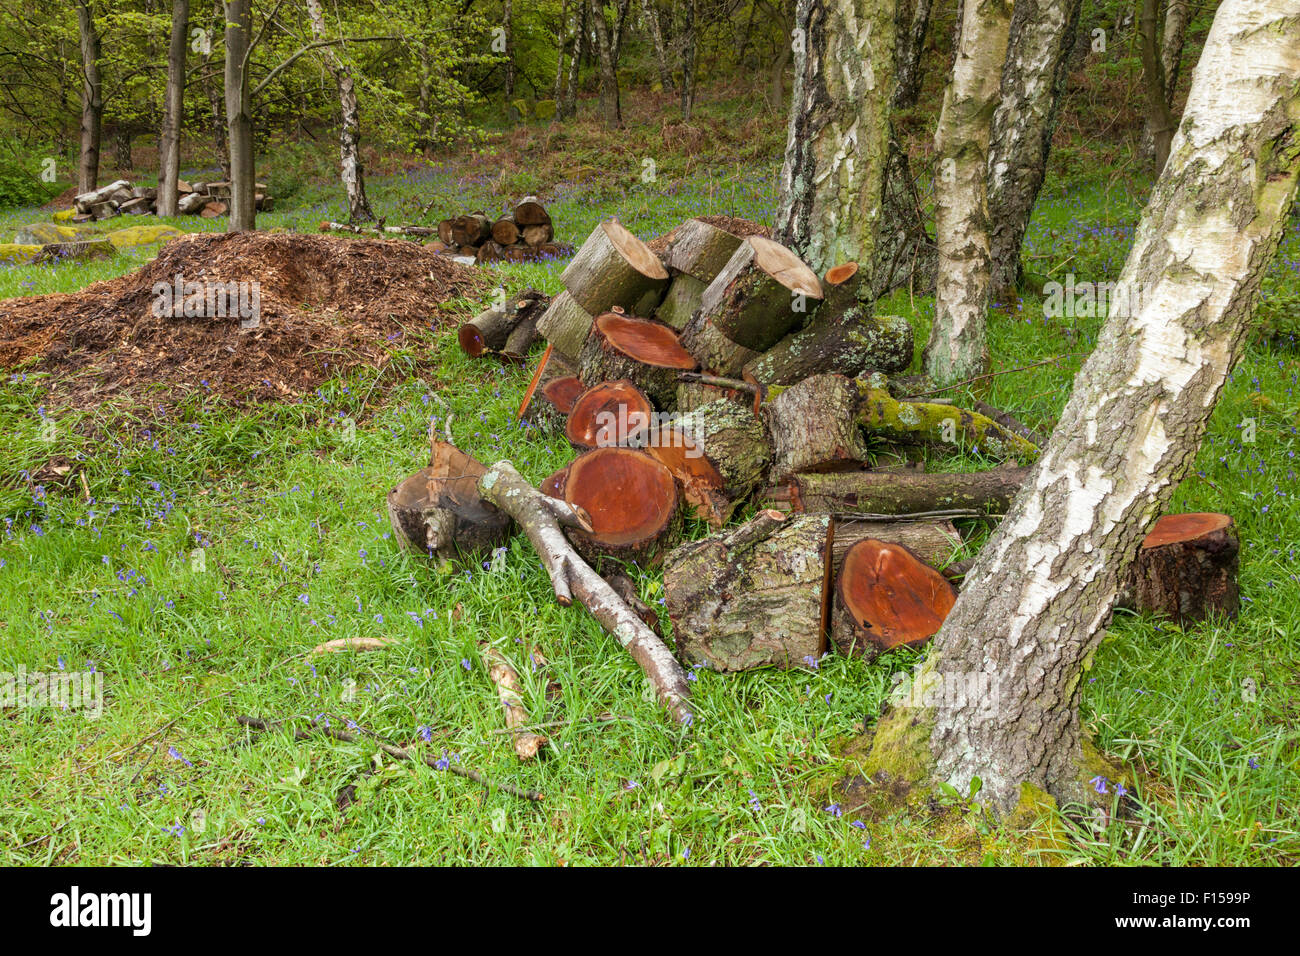 Several wood piles of sawn logs in woodland, Derbyshire, England, UK Stock Photo